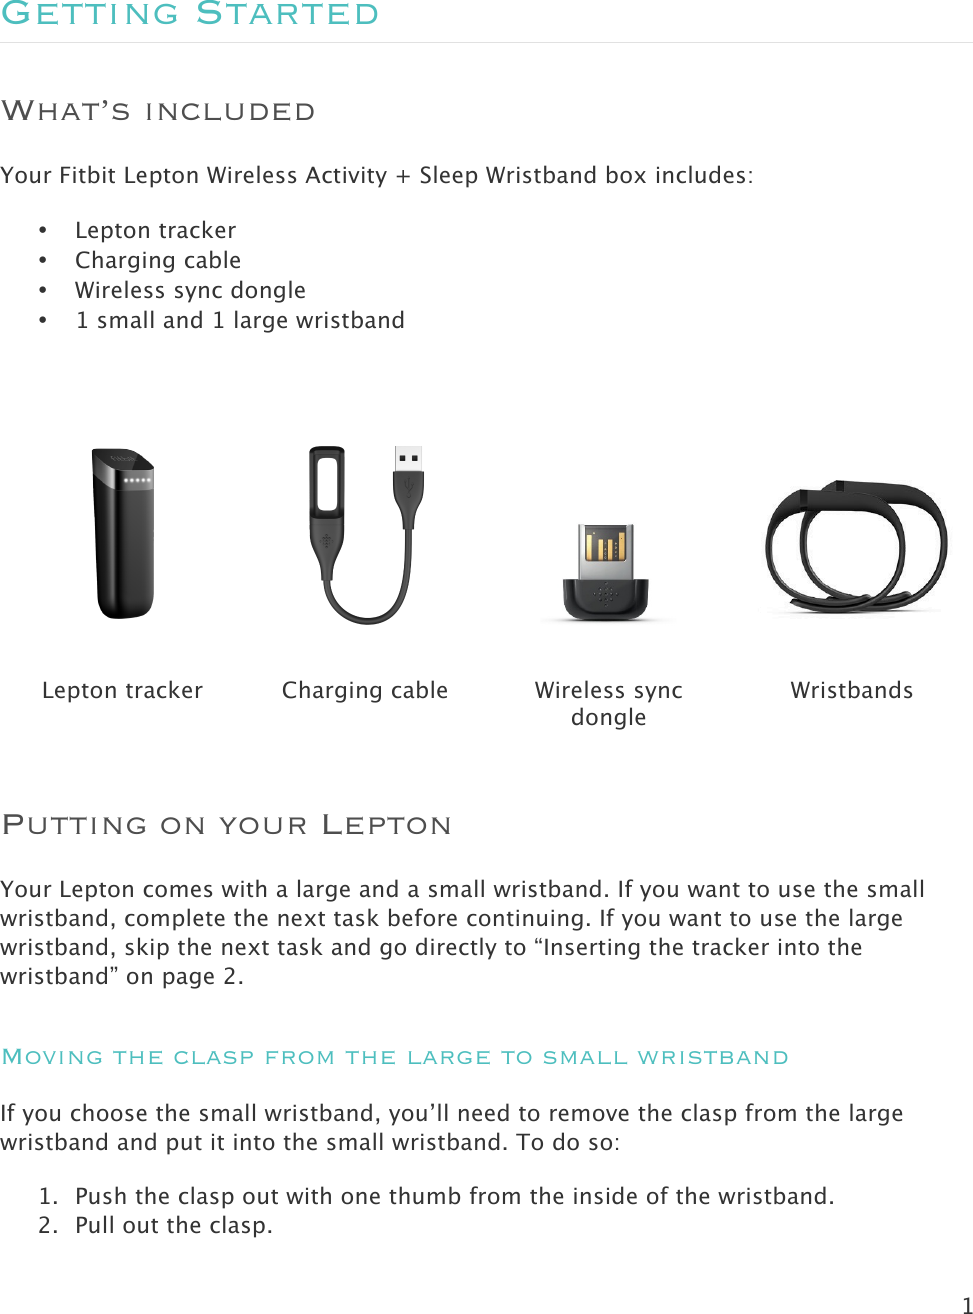 1   Getting Started What’s included Your Fitbit Lepton Wireless Activity + Sleep Wristband box includes: • Lepton tracker • Charging cable • Wireless sync dongle • 1 small and 1 large wristband        Lepton tracker Charging cable Wireless sync dongle Wristbands Putting on your Lepton  Your Lepton comes with a large and a small wristband. If you want to use the small wristband, complete the next task before continuing. If you want to use the large wristband, skip the next task and go directly to “Inserting the tracker into the wristband” on page 2. Moving the clasp from the large to small wristband If you choose the small wristband, you’ll need to remove the clasp from the large wristband and put it into the small wristband. To do so: 1. Push the clasp out with one thumb from the inside of the wristband.  2. Pull out the clasp.  